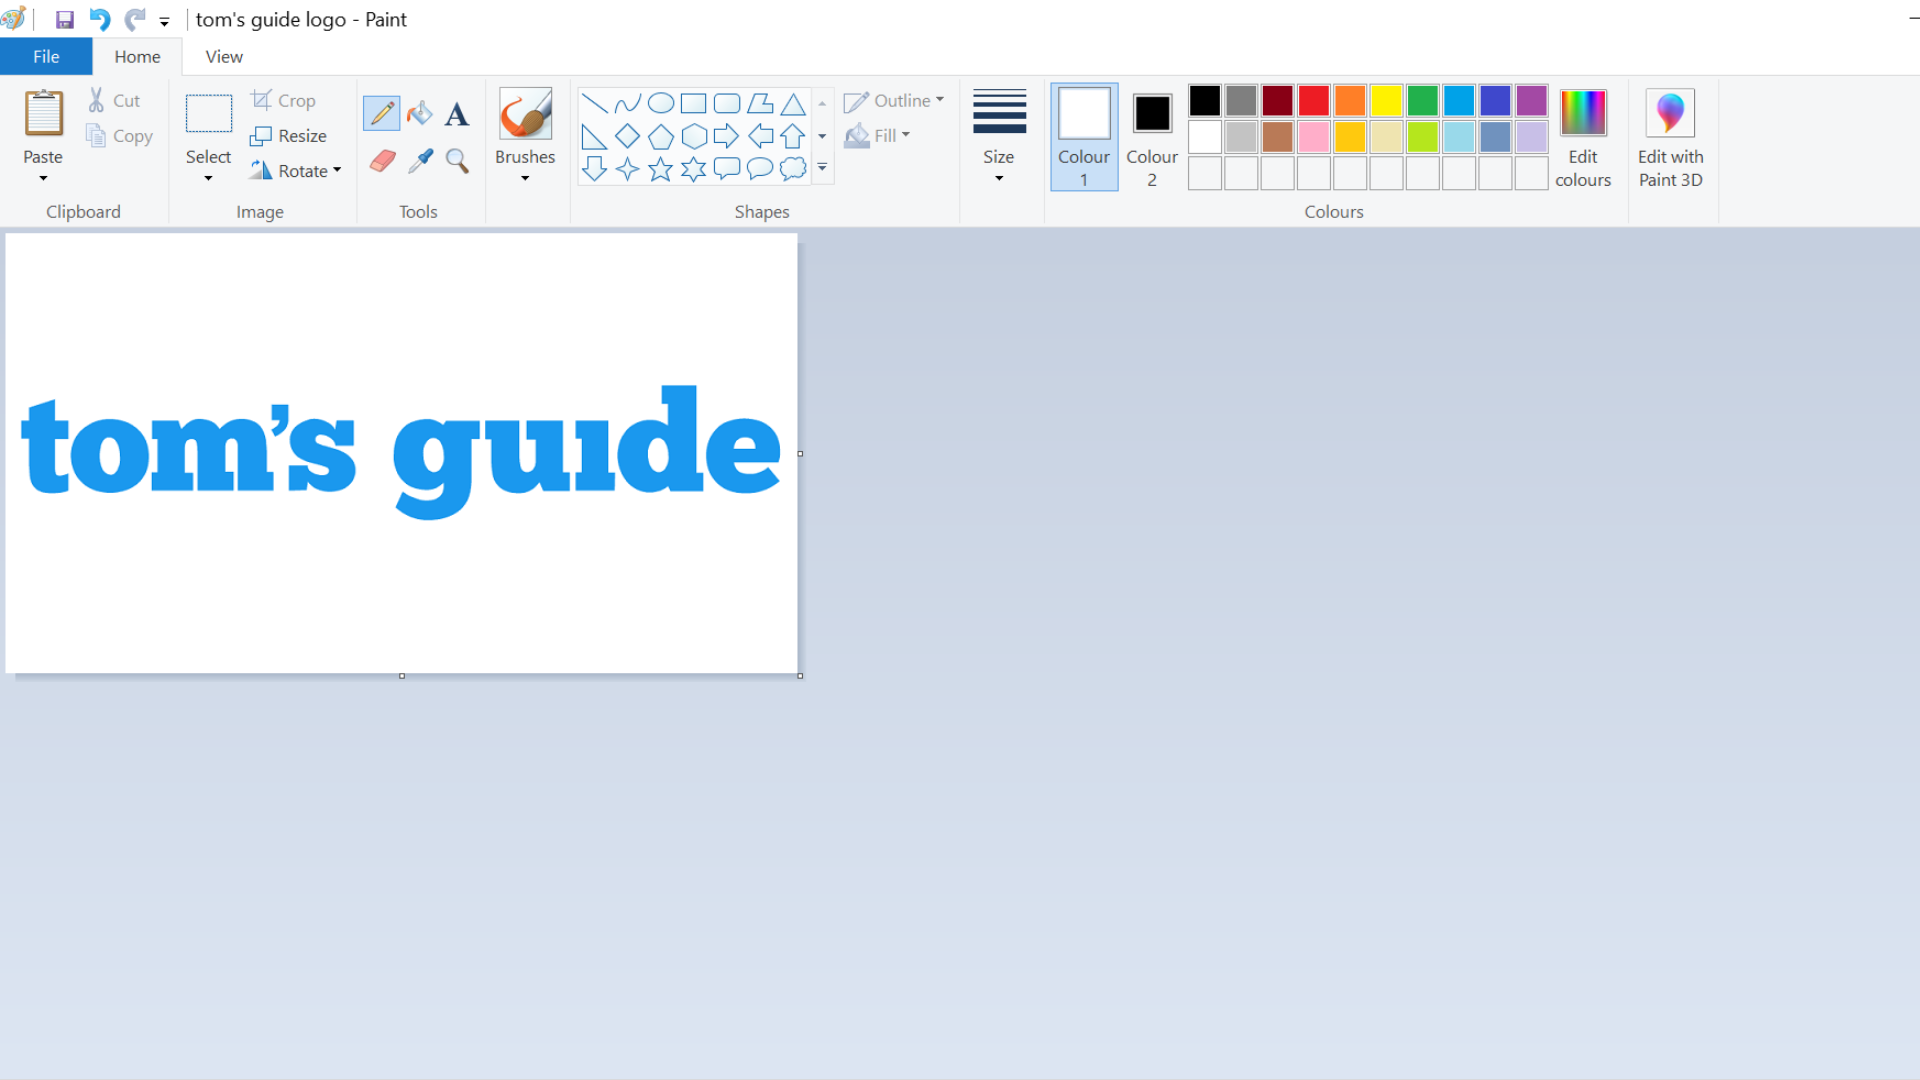 How to edit images in Microsoft Paint | Tom's Guide